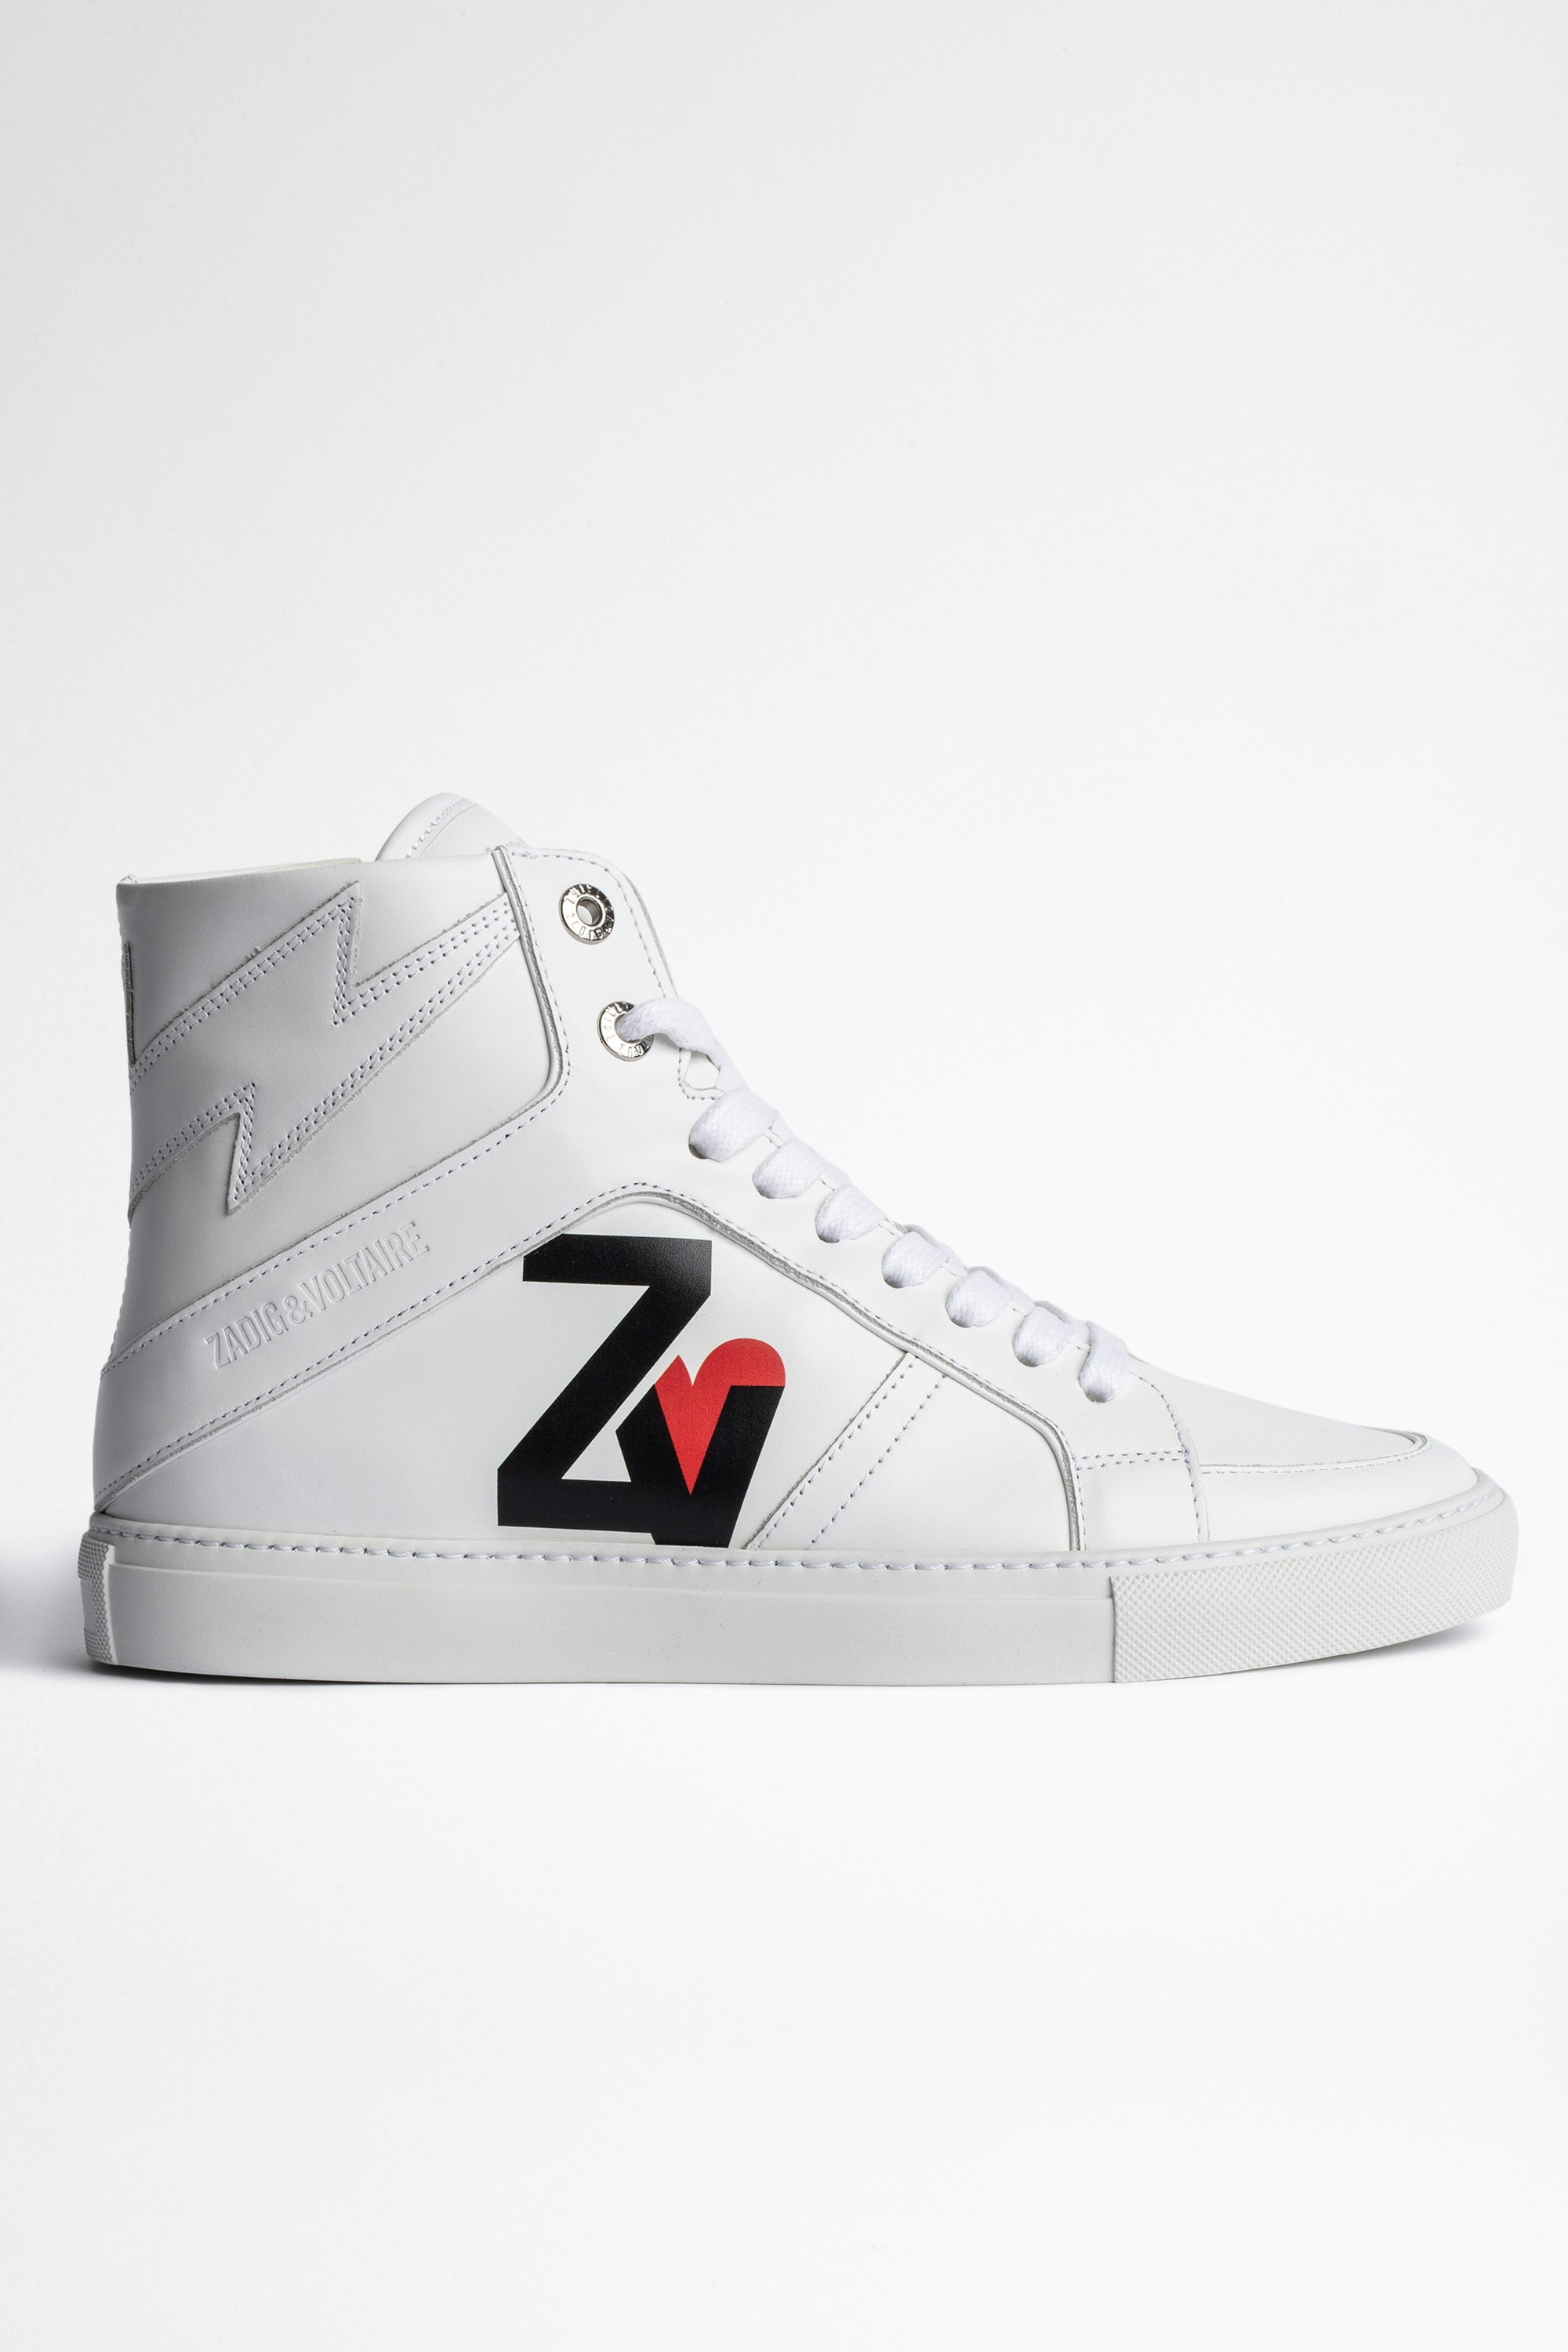 ZV1747 High Flash レザースニーカー Women’s white leather high-top sneakers with ZV heart